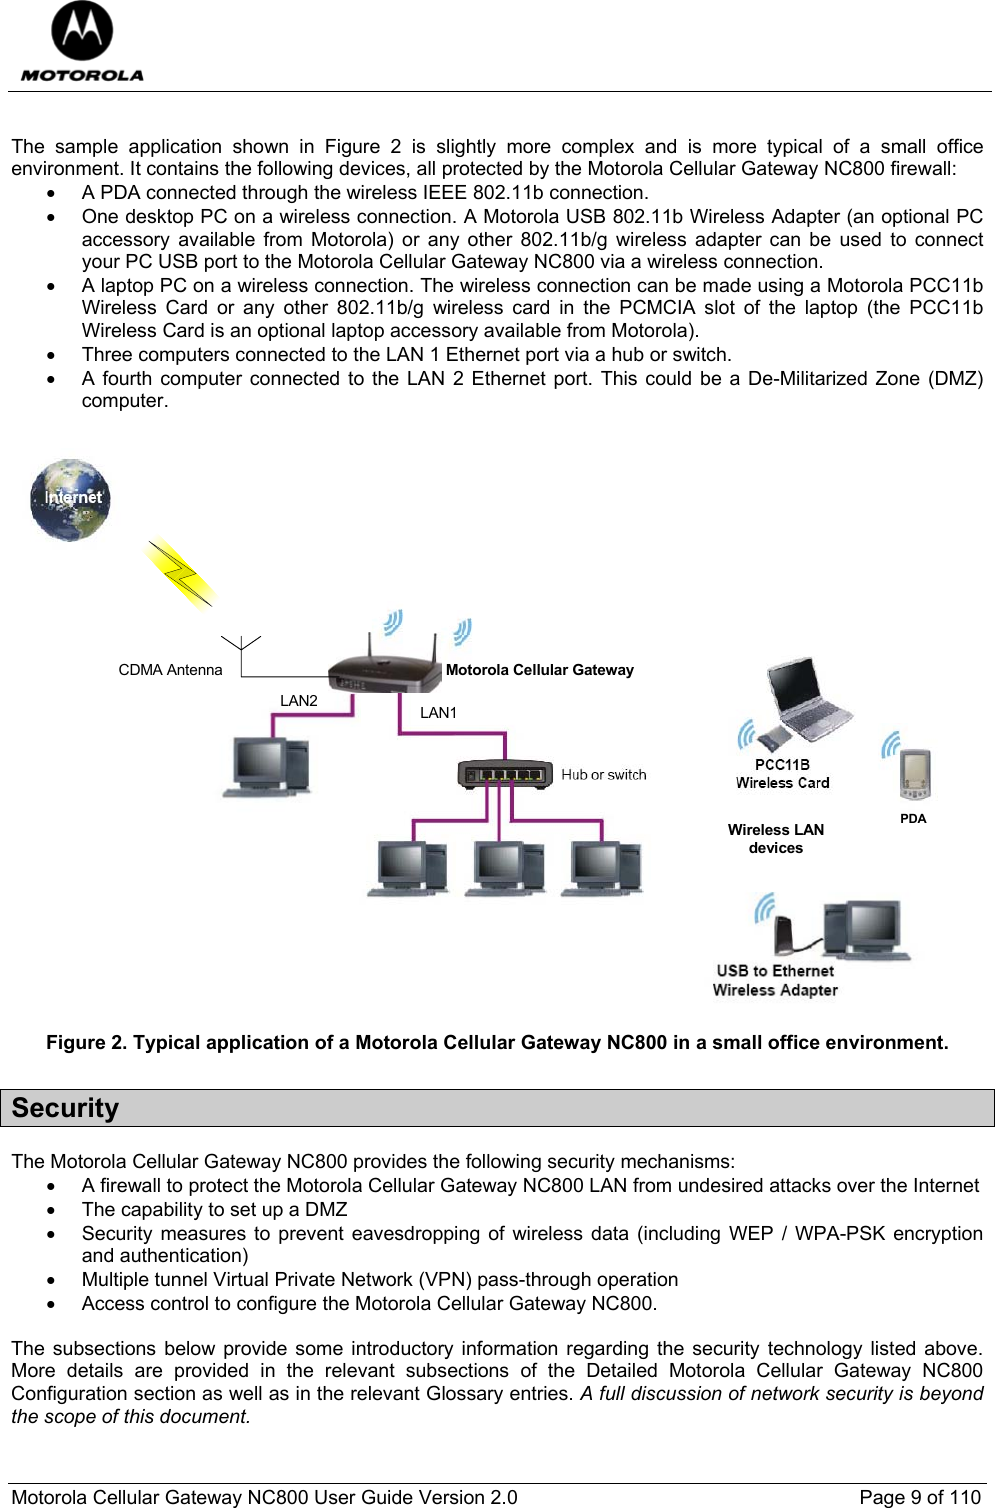  Motorola Cellular Gateway NC800 User Guide Version 2.0     Page 9 of 110   The sample application shown in Figure 2 is slightly more complex and is more typical of a small office environment. It contains the following devices, all protected by the Motorola Cellular Gateway NC800 firewall:  •  A PDA connected through the wireless IEEE 802.11b connection. •  One desktop PC on a wireless connection. A Motorola USB 802.11b Wireless Adapter (an optional PC accessory available from Motorola) or any other 802.11b/g wireless adapter can be used to connect your PC USB port to the Motorola Cellular Gateway NC800 via a wireless connection. •  A laptop PC on a wireless connection. The wireless connection can be made using a Motorola PCC11b Wireless Card or any other 802.11b/g wireless card in the PCMCIA slot of the laptop (the PCC11b Wireless Card is an optional laptop accessory available from Motorola).   •  Three computers connected to the LAN 1 Ethernet port via a hub or switch. •  A fourth computer connected to the LAN 2 Ethernet port. This could be a De-Militarized Zone (DMZ) computer.  Motorola Cellular GatewayCDMA AntennaPDAWireless LANdevicesLAN2 LAN1 Figure 2. Typical application of a Motorola Cellular Gateway NC800 in a small office environment. Security The Motorola Cellular Gateway NC800 provides the following security mechanisms: •  A firewall to protect the Motorola Cellular Gateway NC800 LAN from undesired attacks over the Internet •  The capability to set up a DMZ •  Security measures to prevent eavesdropping of wireless data (including WEP / WPA-PSK encryption and authentication) •  Multiple tunnel Virtual Private Network (VPN) pass-through operation •  Access control to configure the Motorola Cellular Gateway NC800.  The subsections below provide some introductory information regarding the security technology listed above. More details are provided in the relevant subsections of the Detailed Motorola Cellular Gateway NC800 Configuration section as well as in the relevant Glossary entries. A full discussion of network security is beyond the scope of this document.   